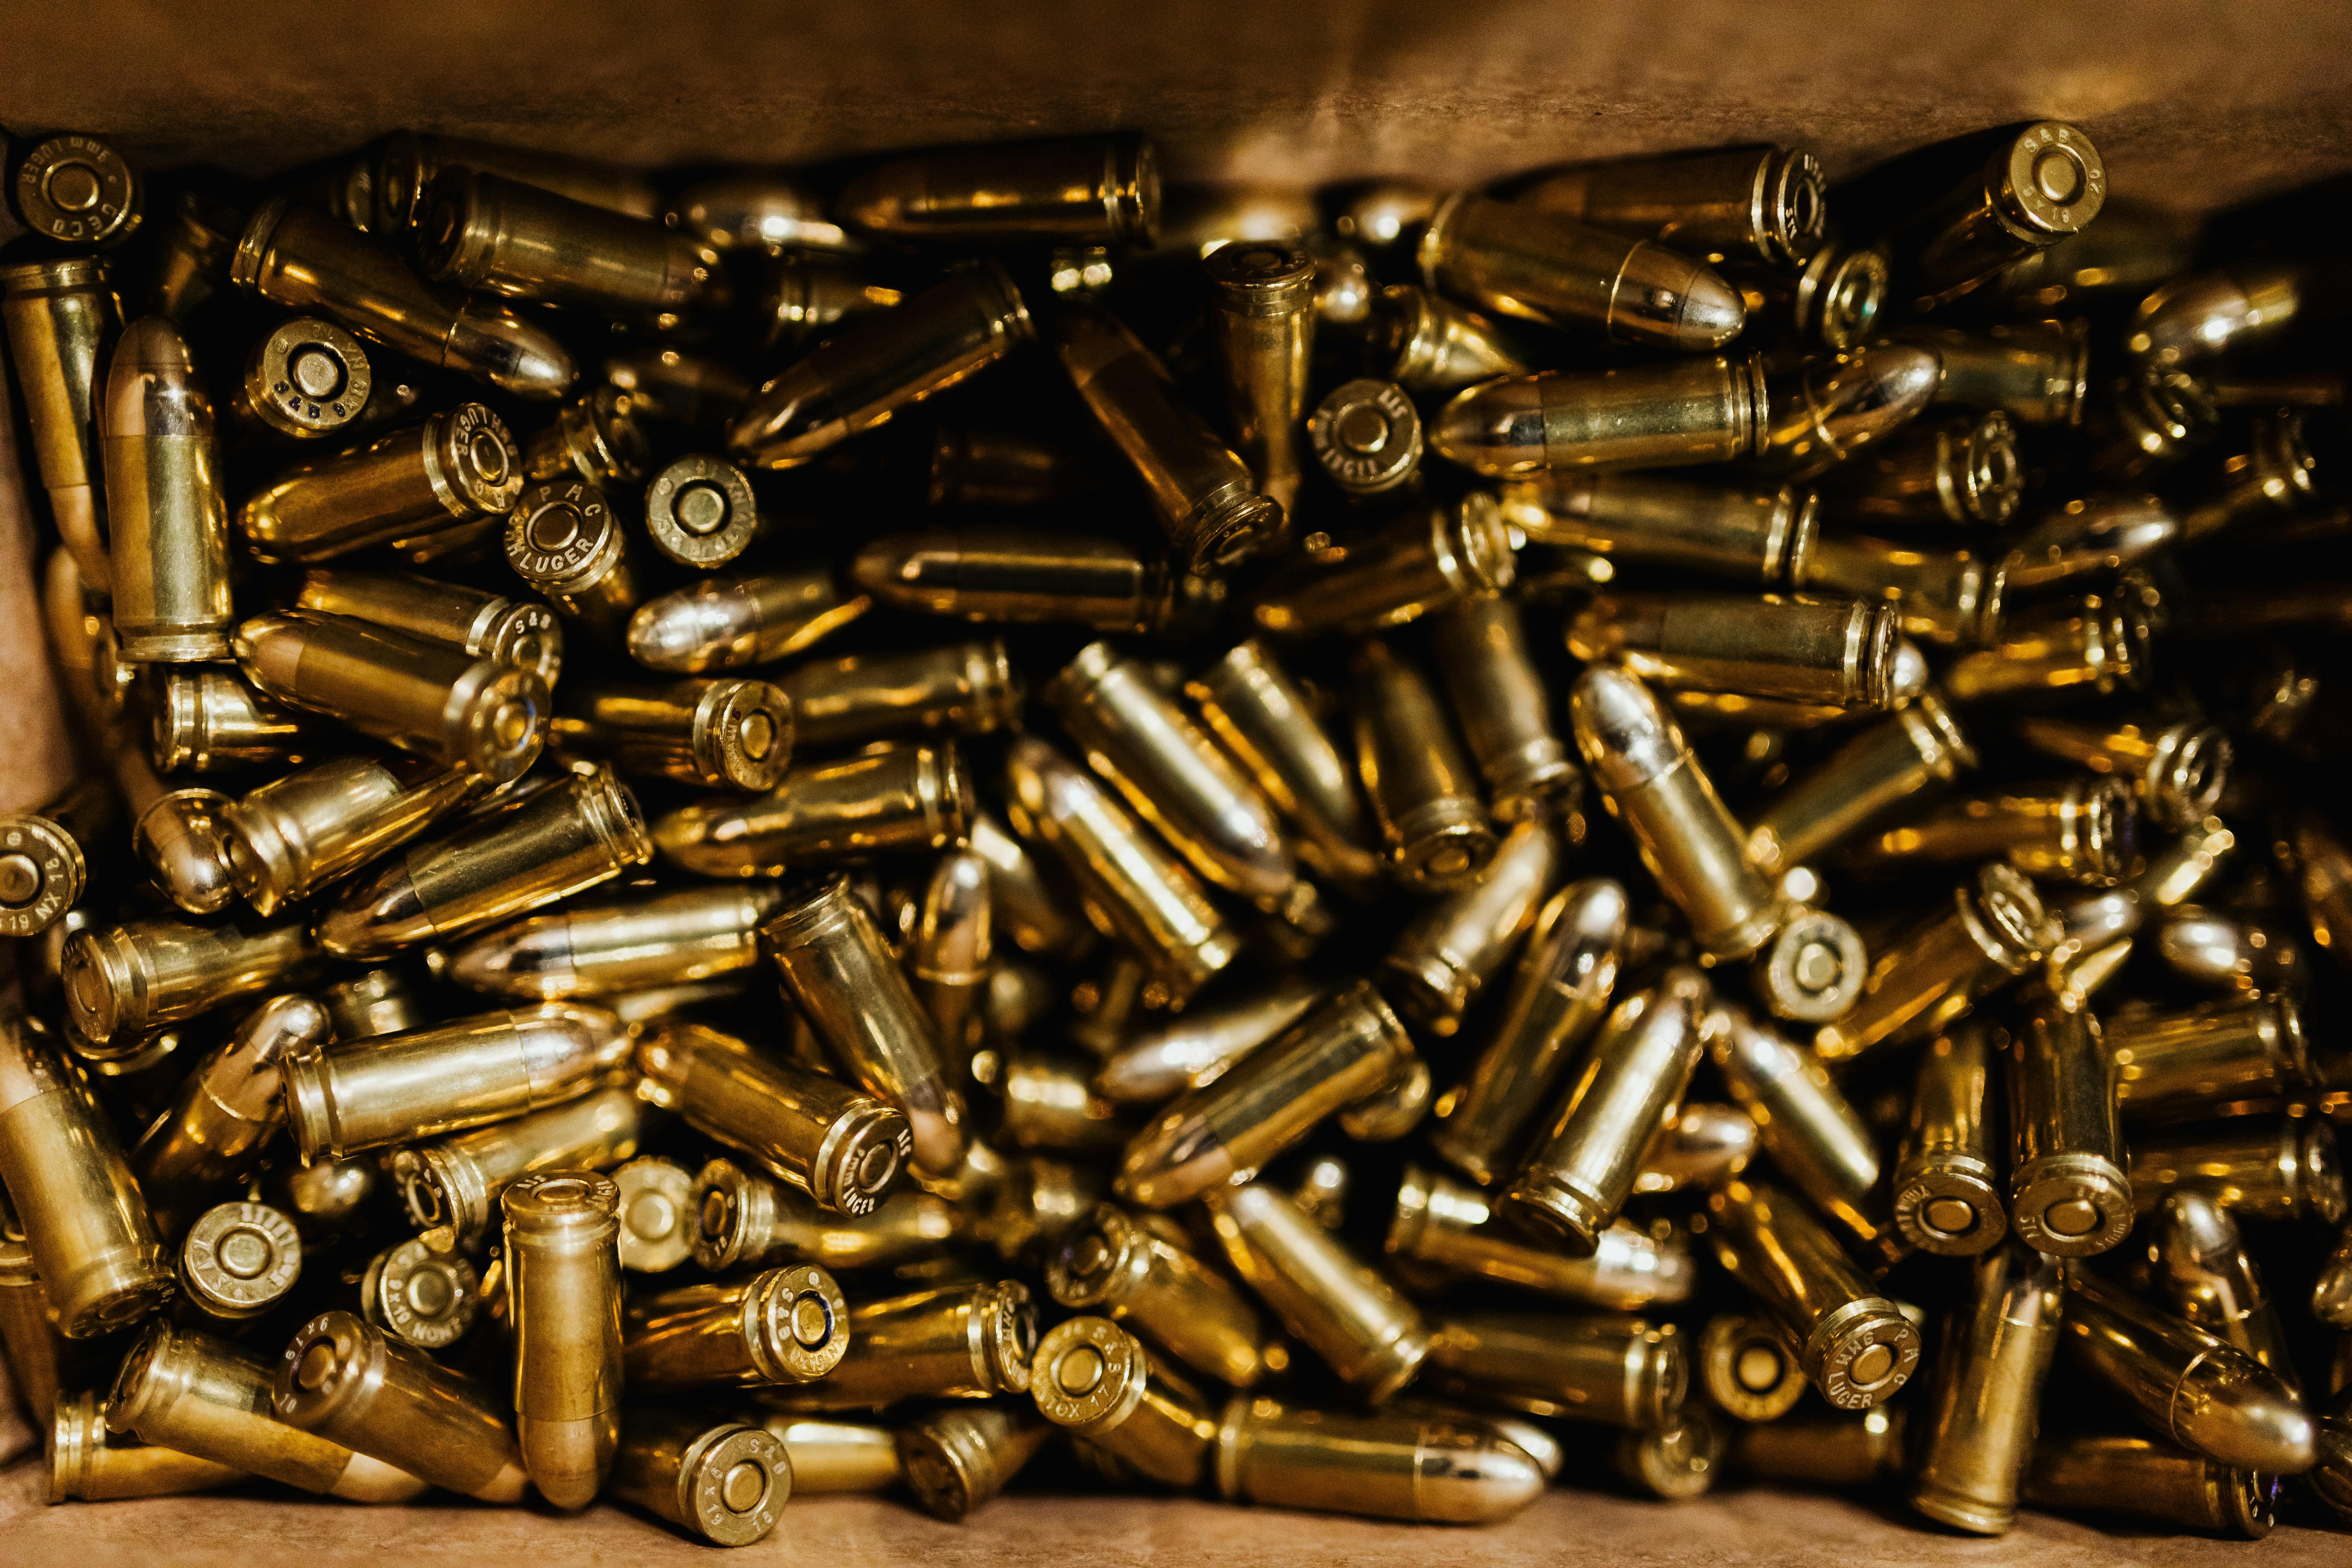 Bullets Photos Download The BEST Free Bullets Stock Photos  HD Images